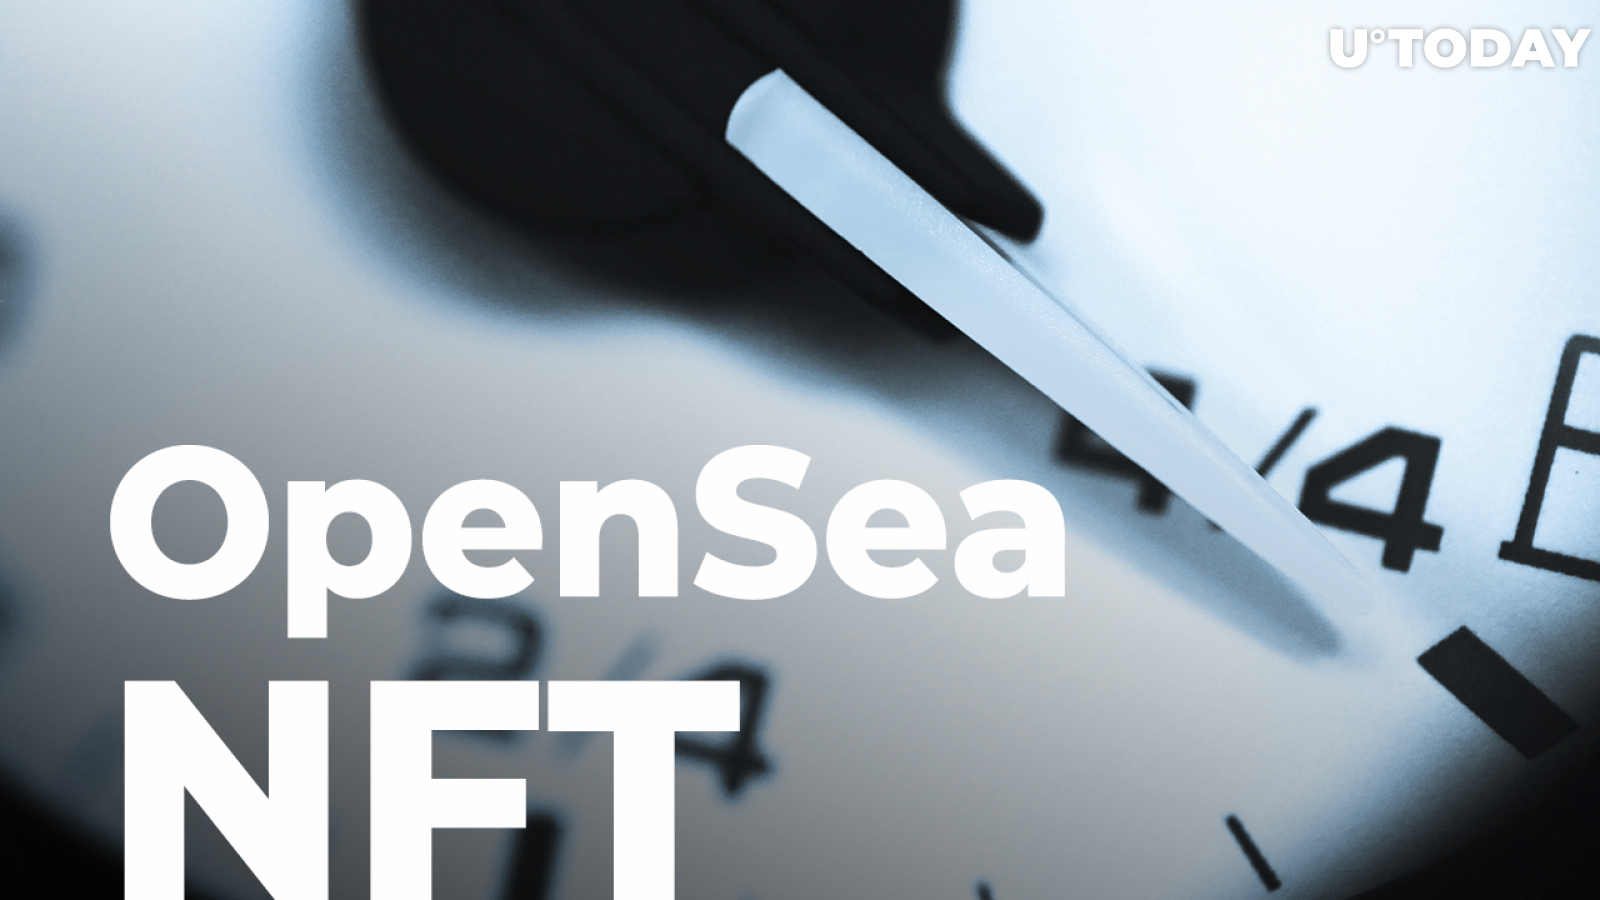 OpenSea NFT Major Yet Again Surpassed Uniswap by Gas Consumption. What Does This Mean?